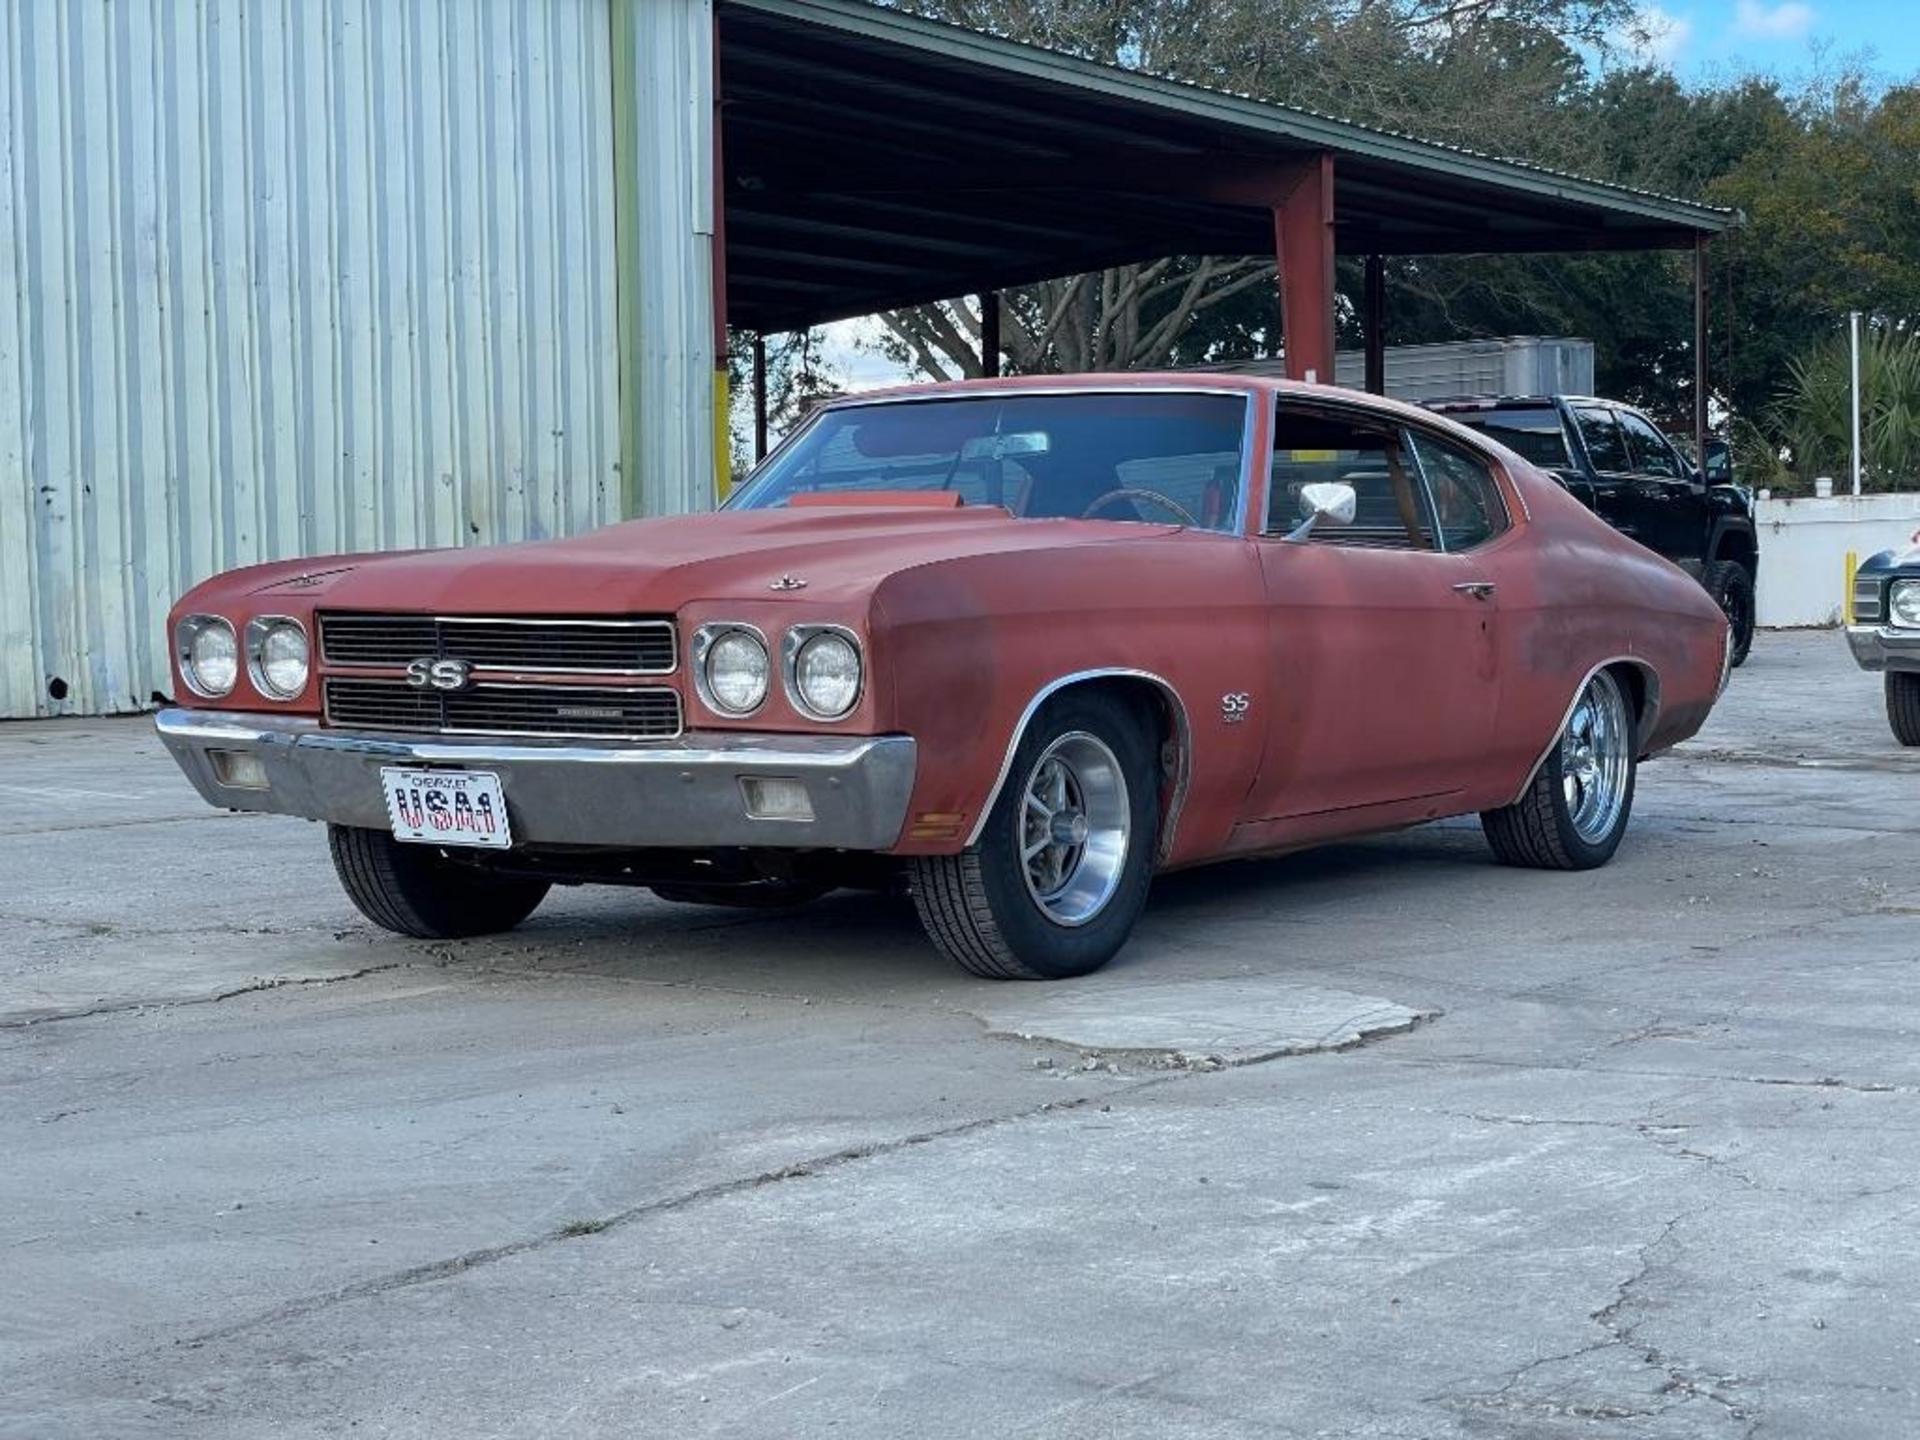 1970 Chevrolet Chevelle SS Project Car with Build Shee